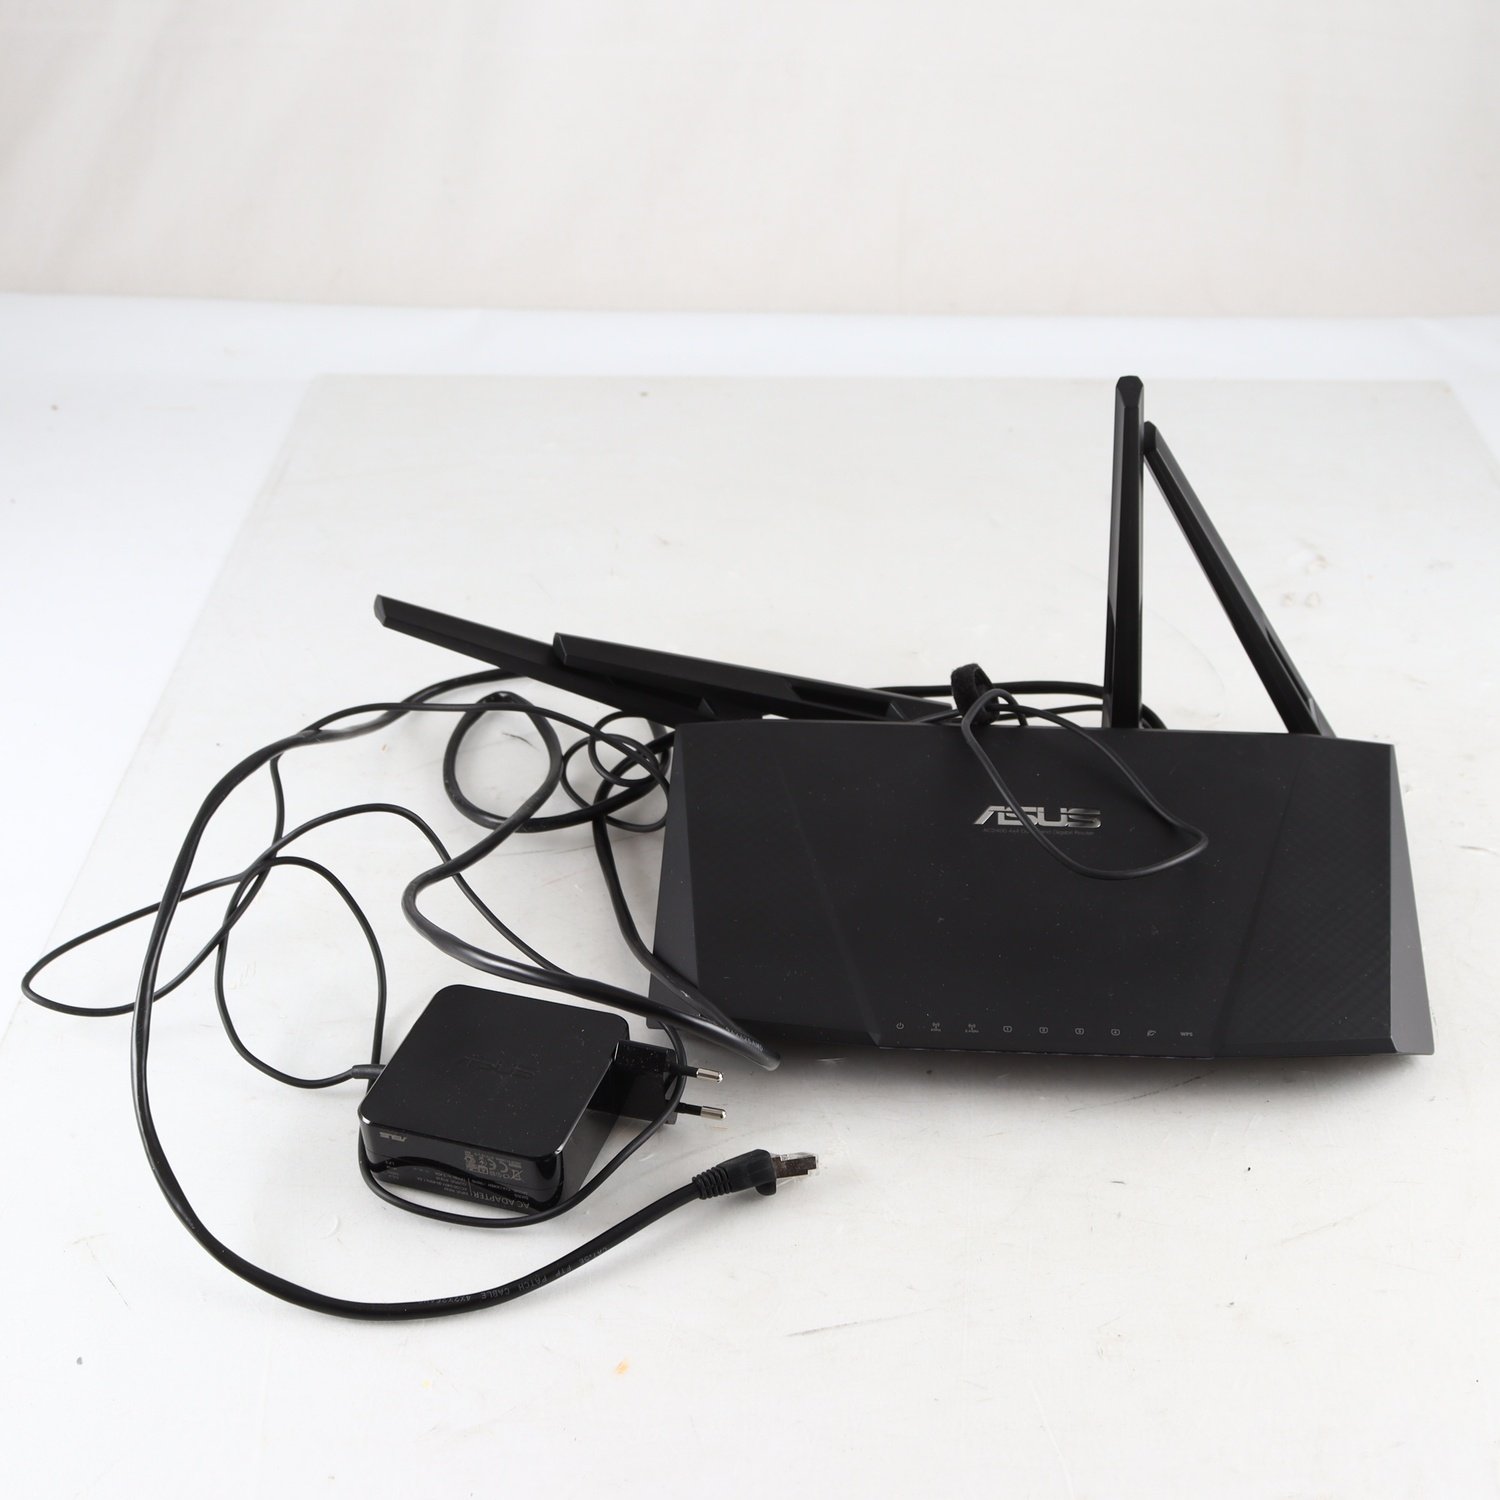 Router, Asus ac2400.